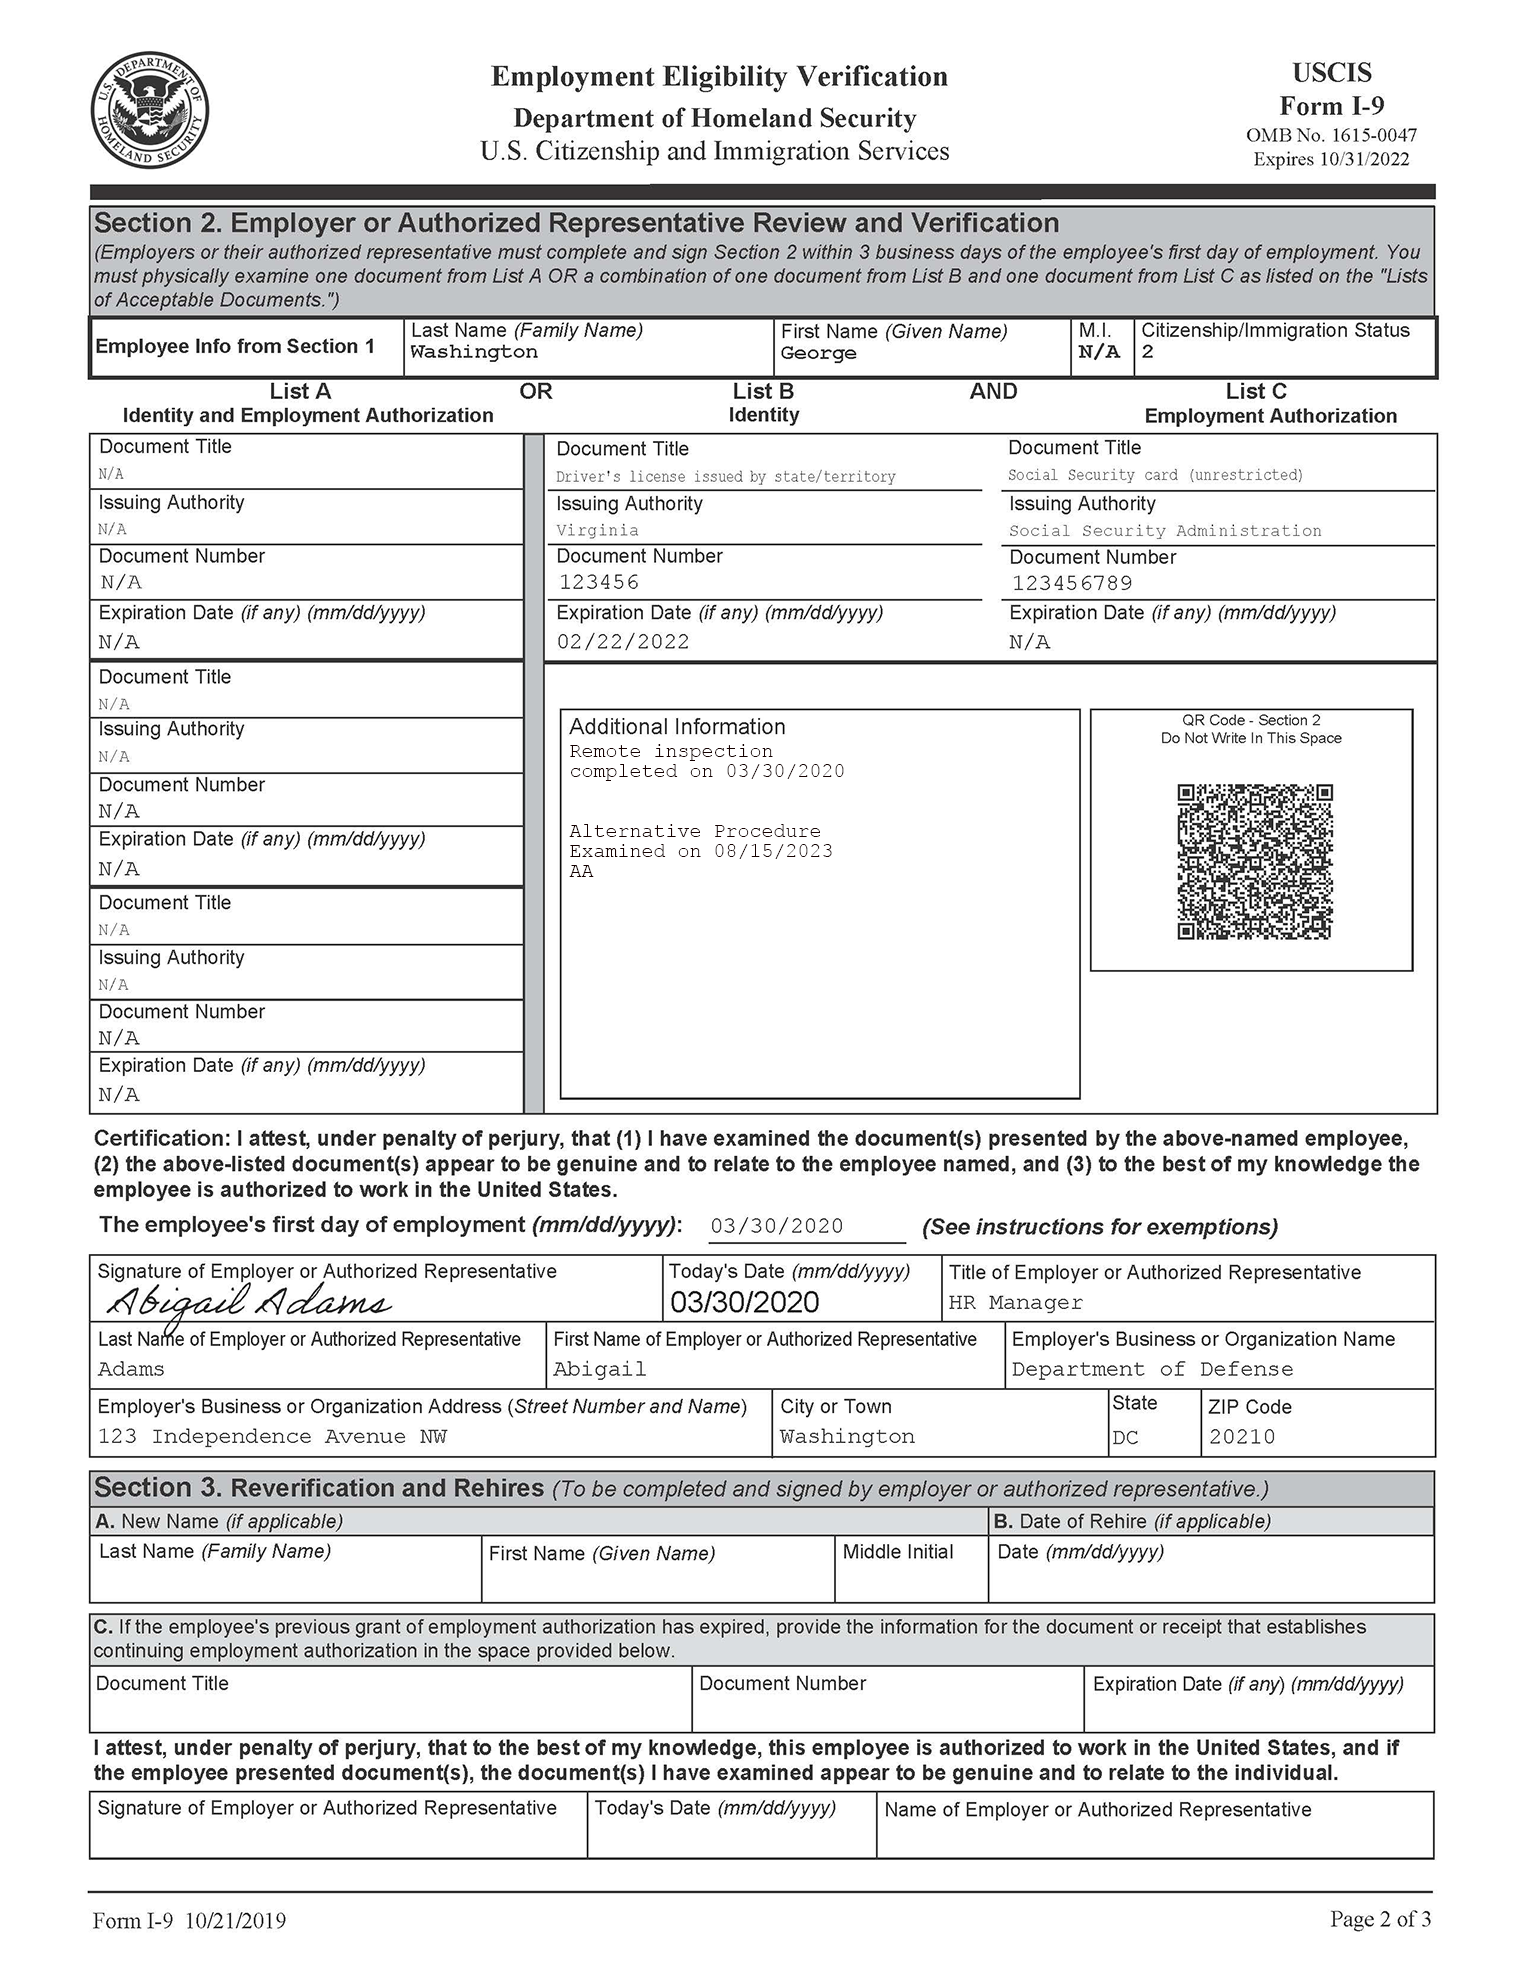 Sample Form I-9 showing how to record USCIS Physical Inspection Done by Different Person